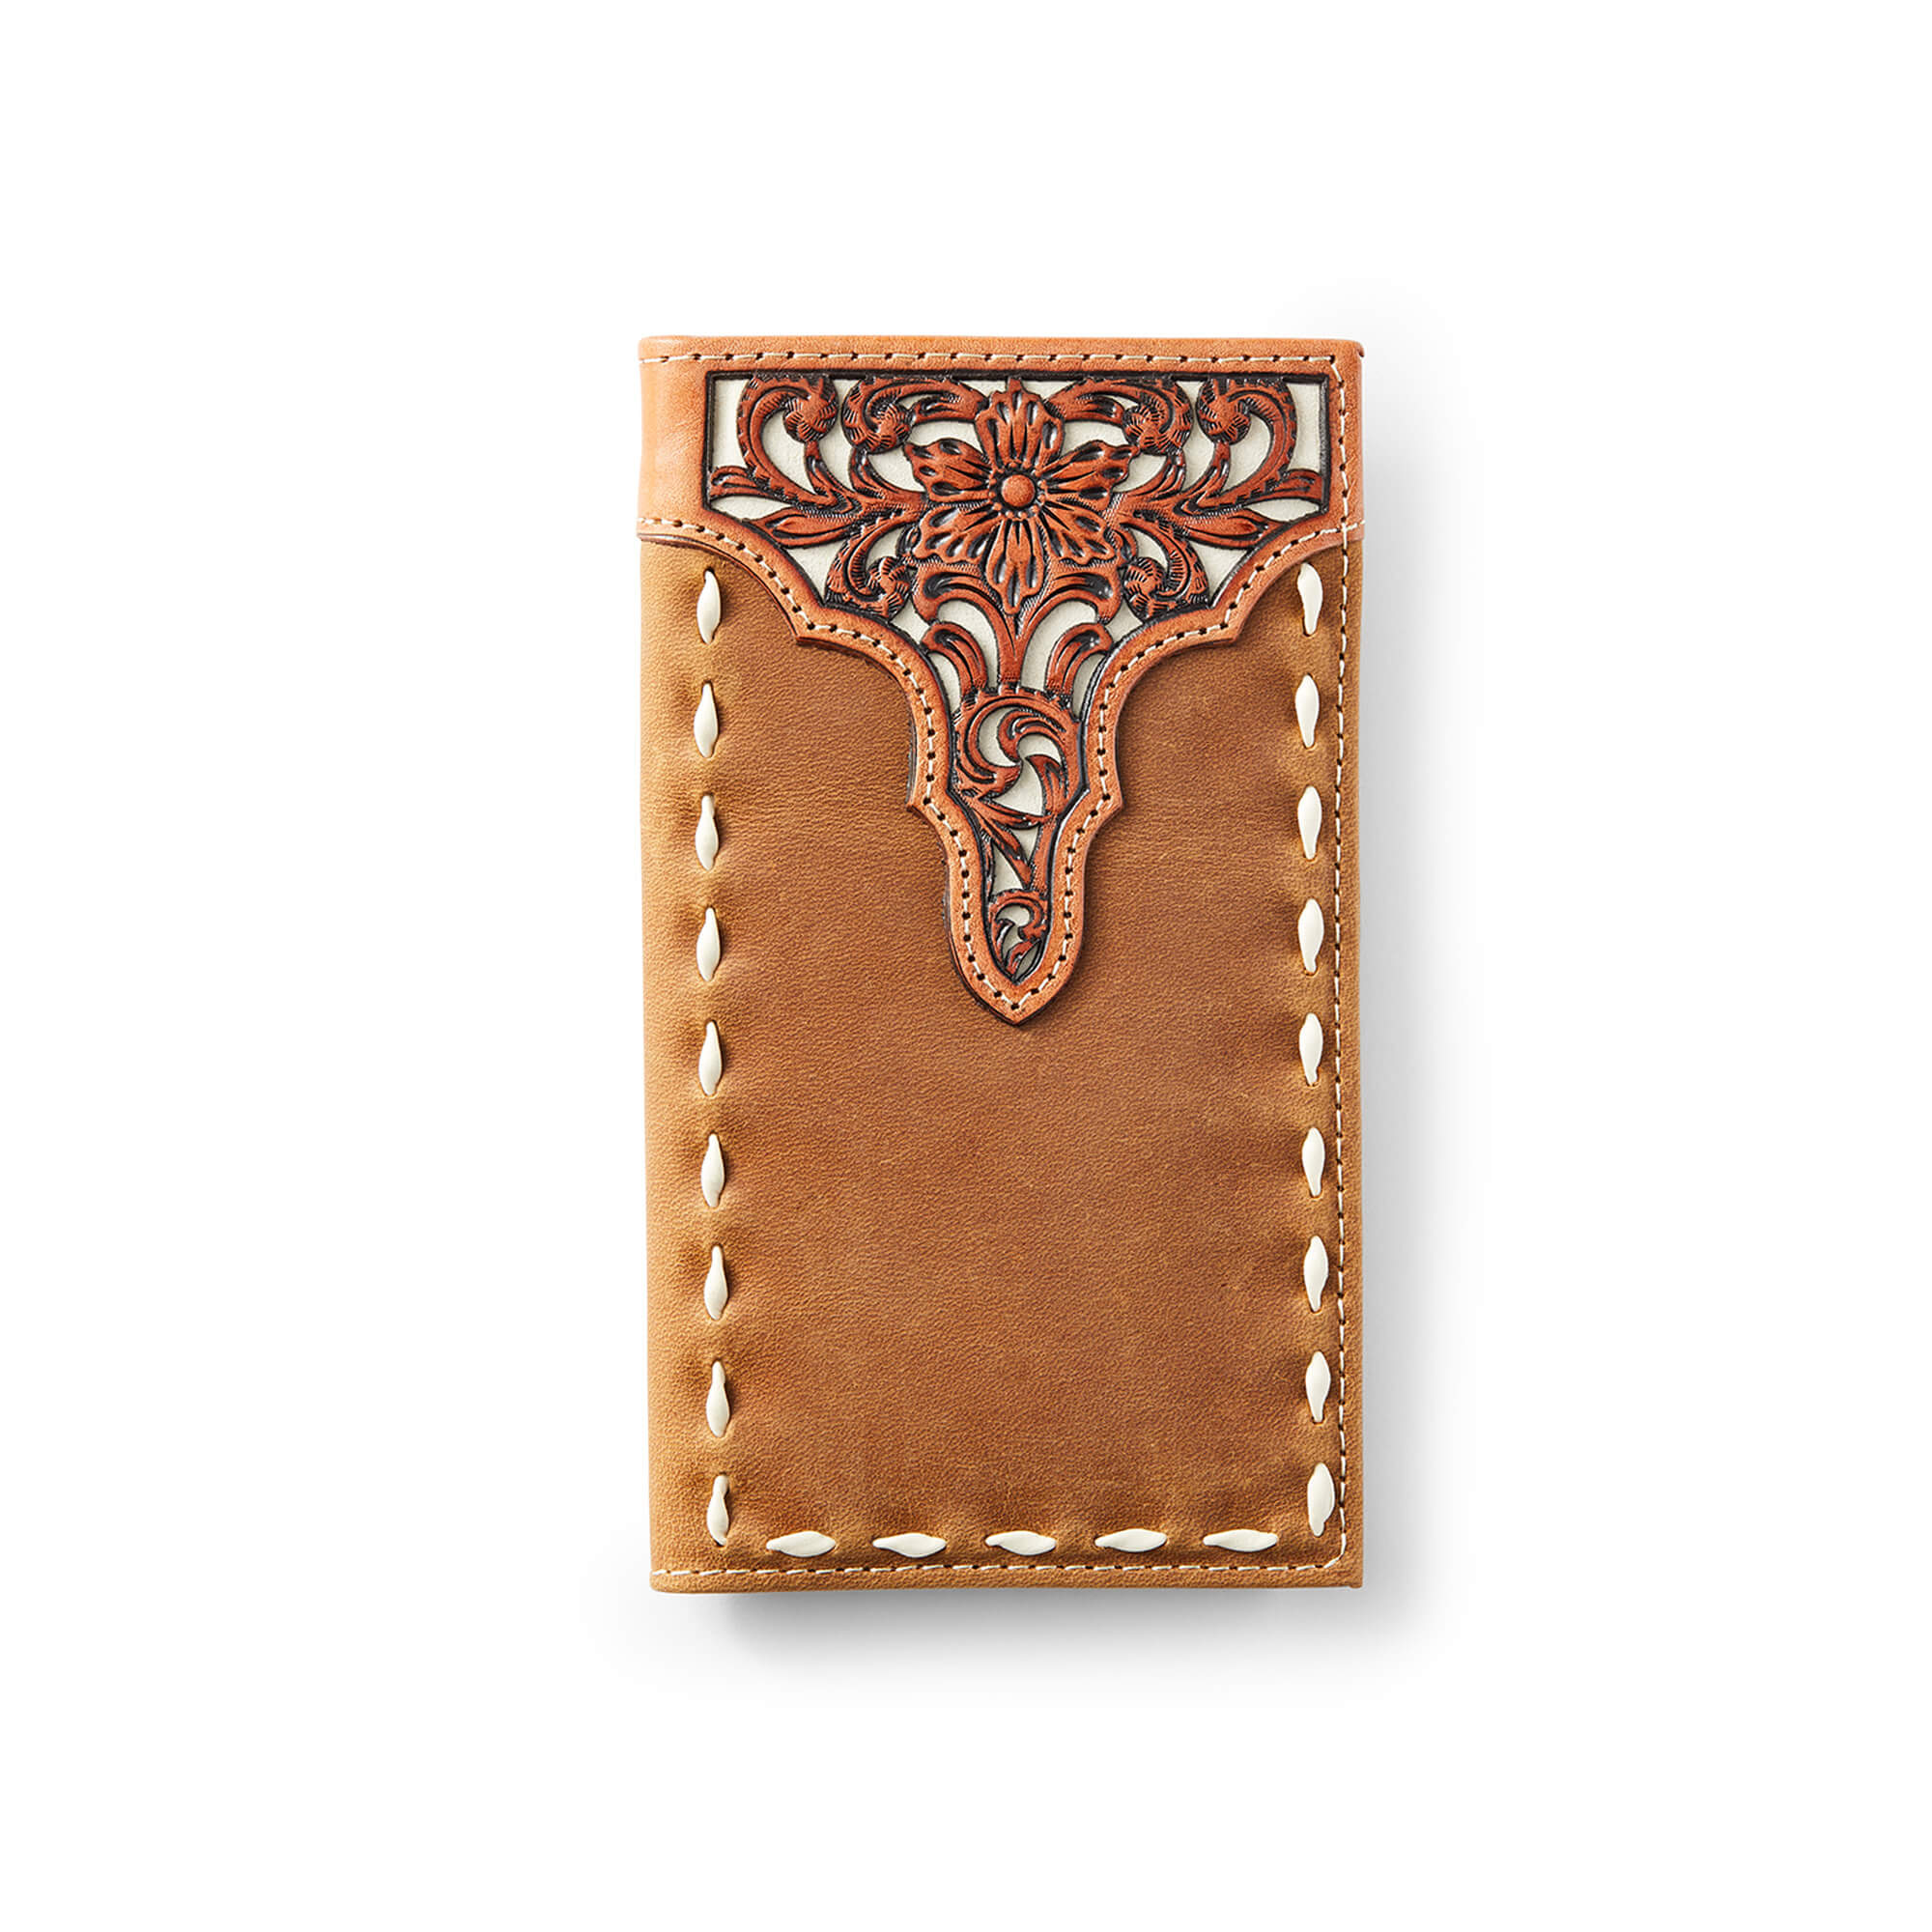 Men's Rodeo Wallet Floral Embroidery Run Stitch in Medium Brown Leather, Size: OS by Ariat